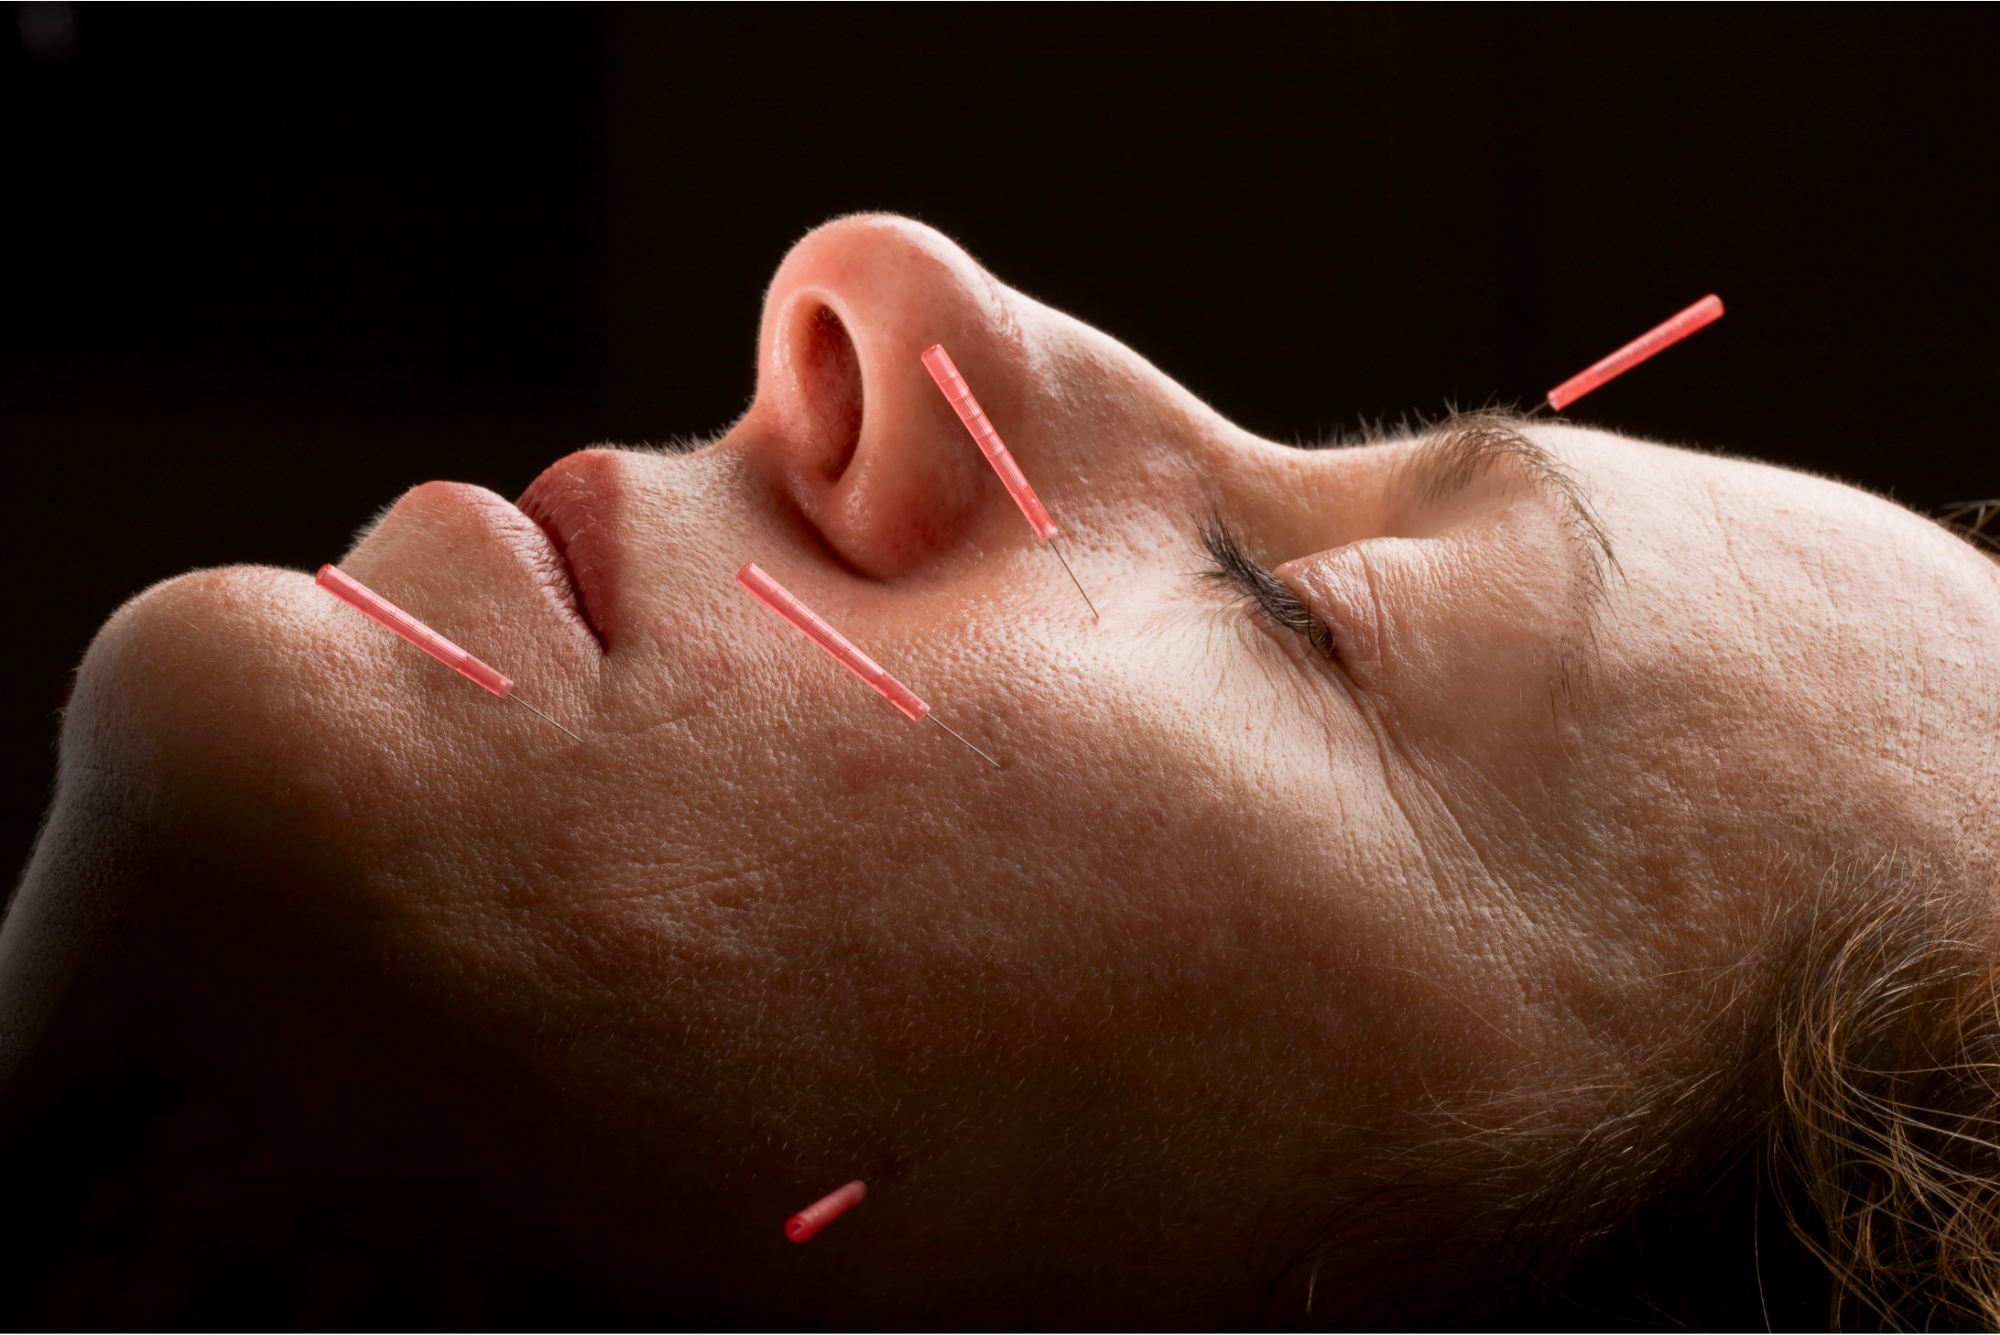 Acupuncture needle therapy